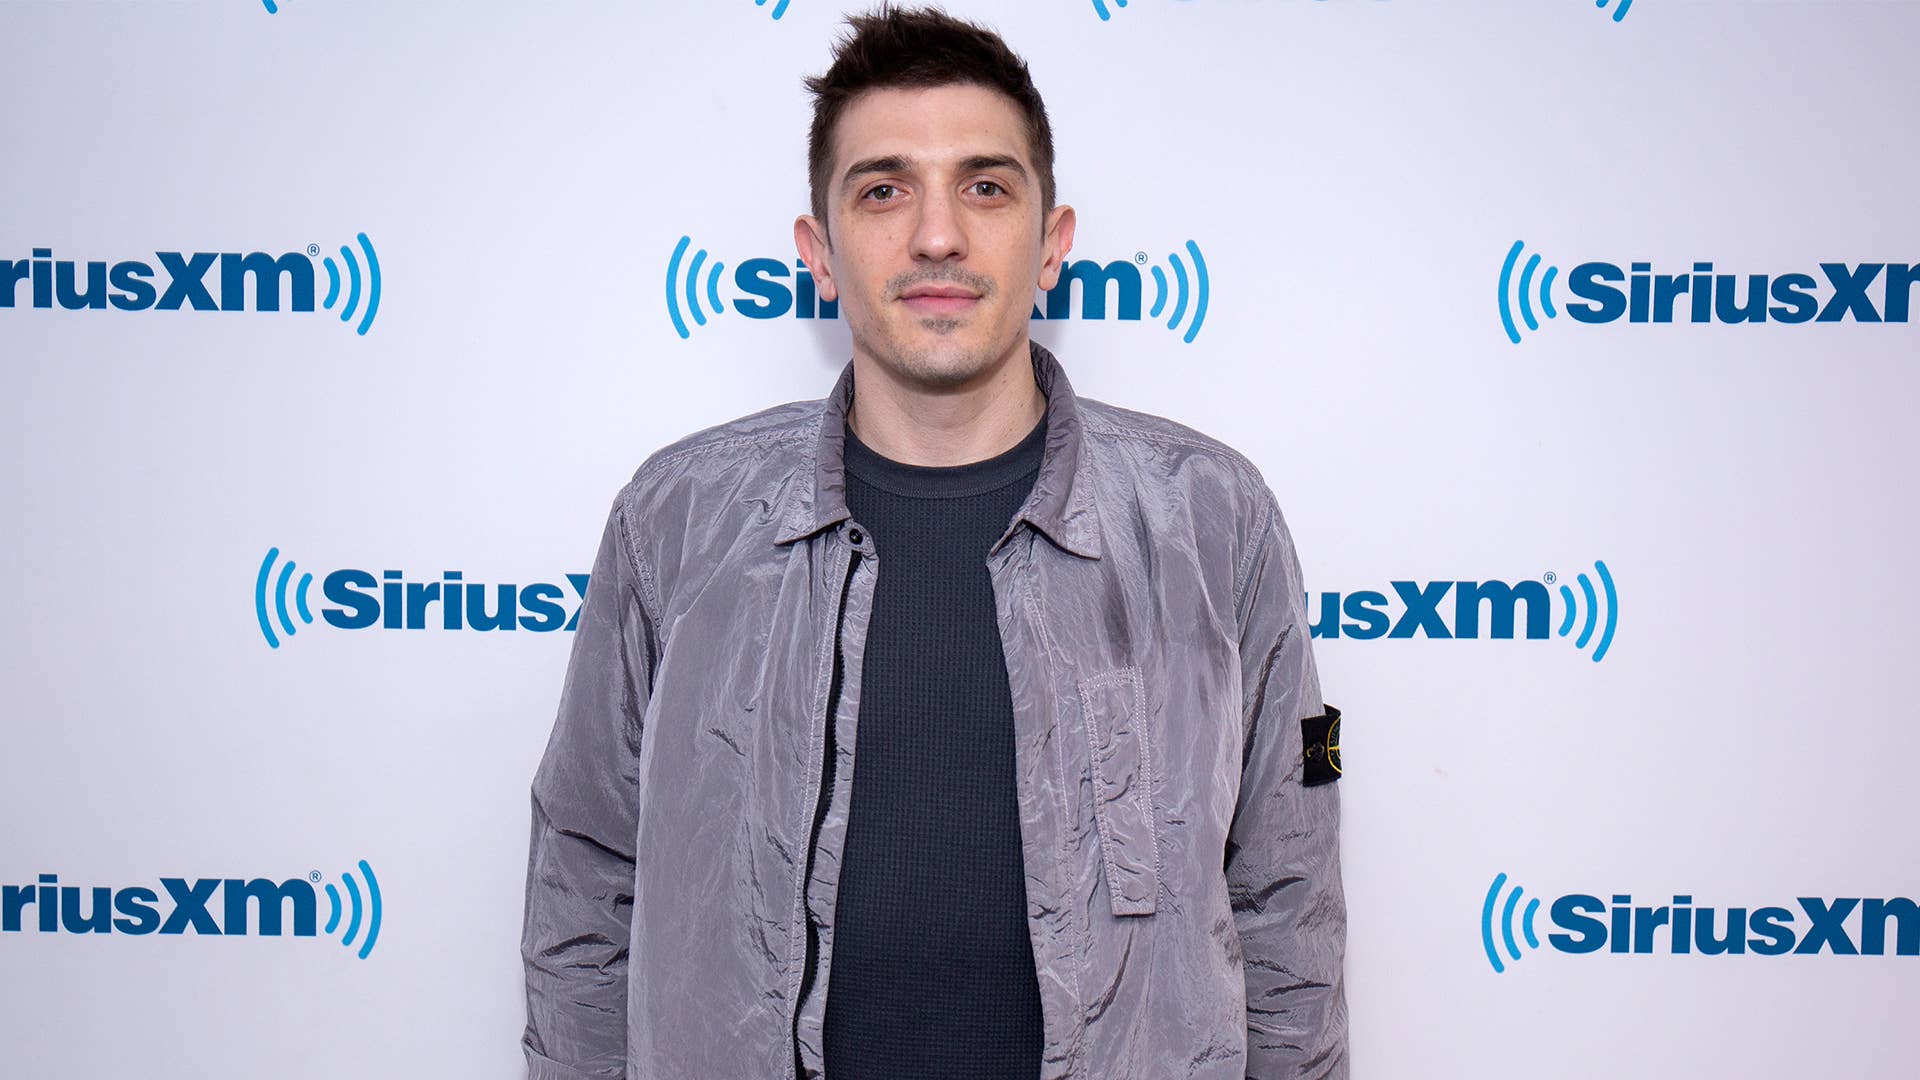 Andrew at a SiriusXM event